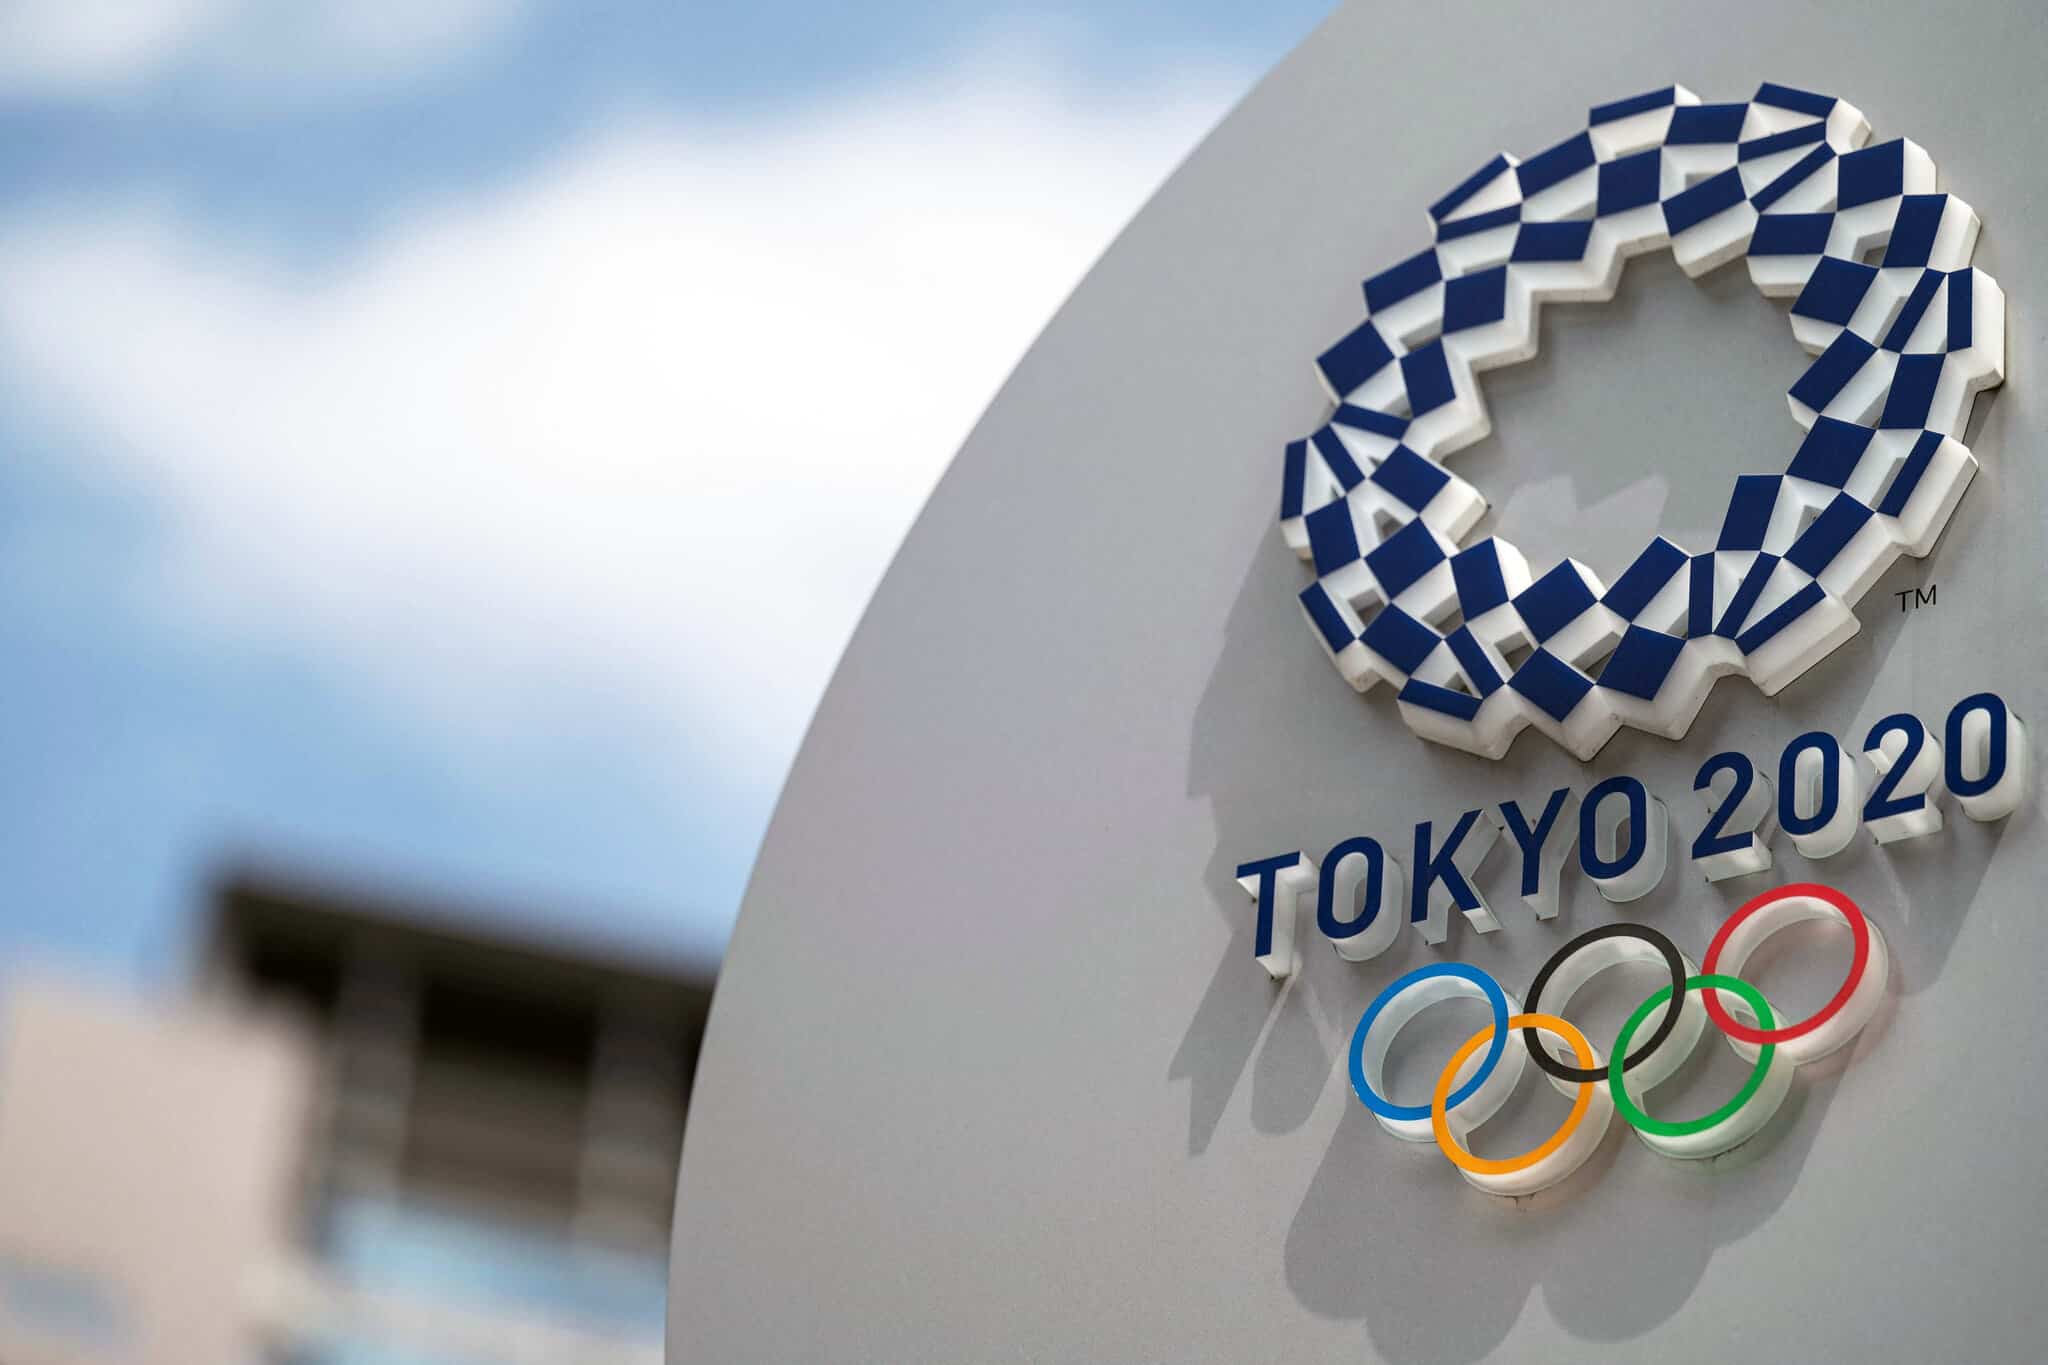 How To Watch The 2020 Tokyo Olympics In 2021